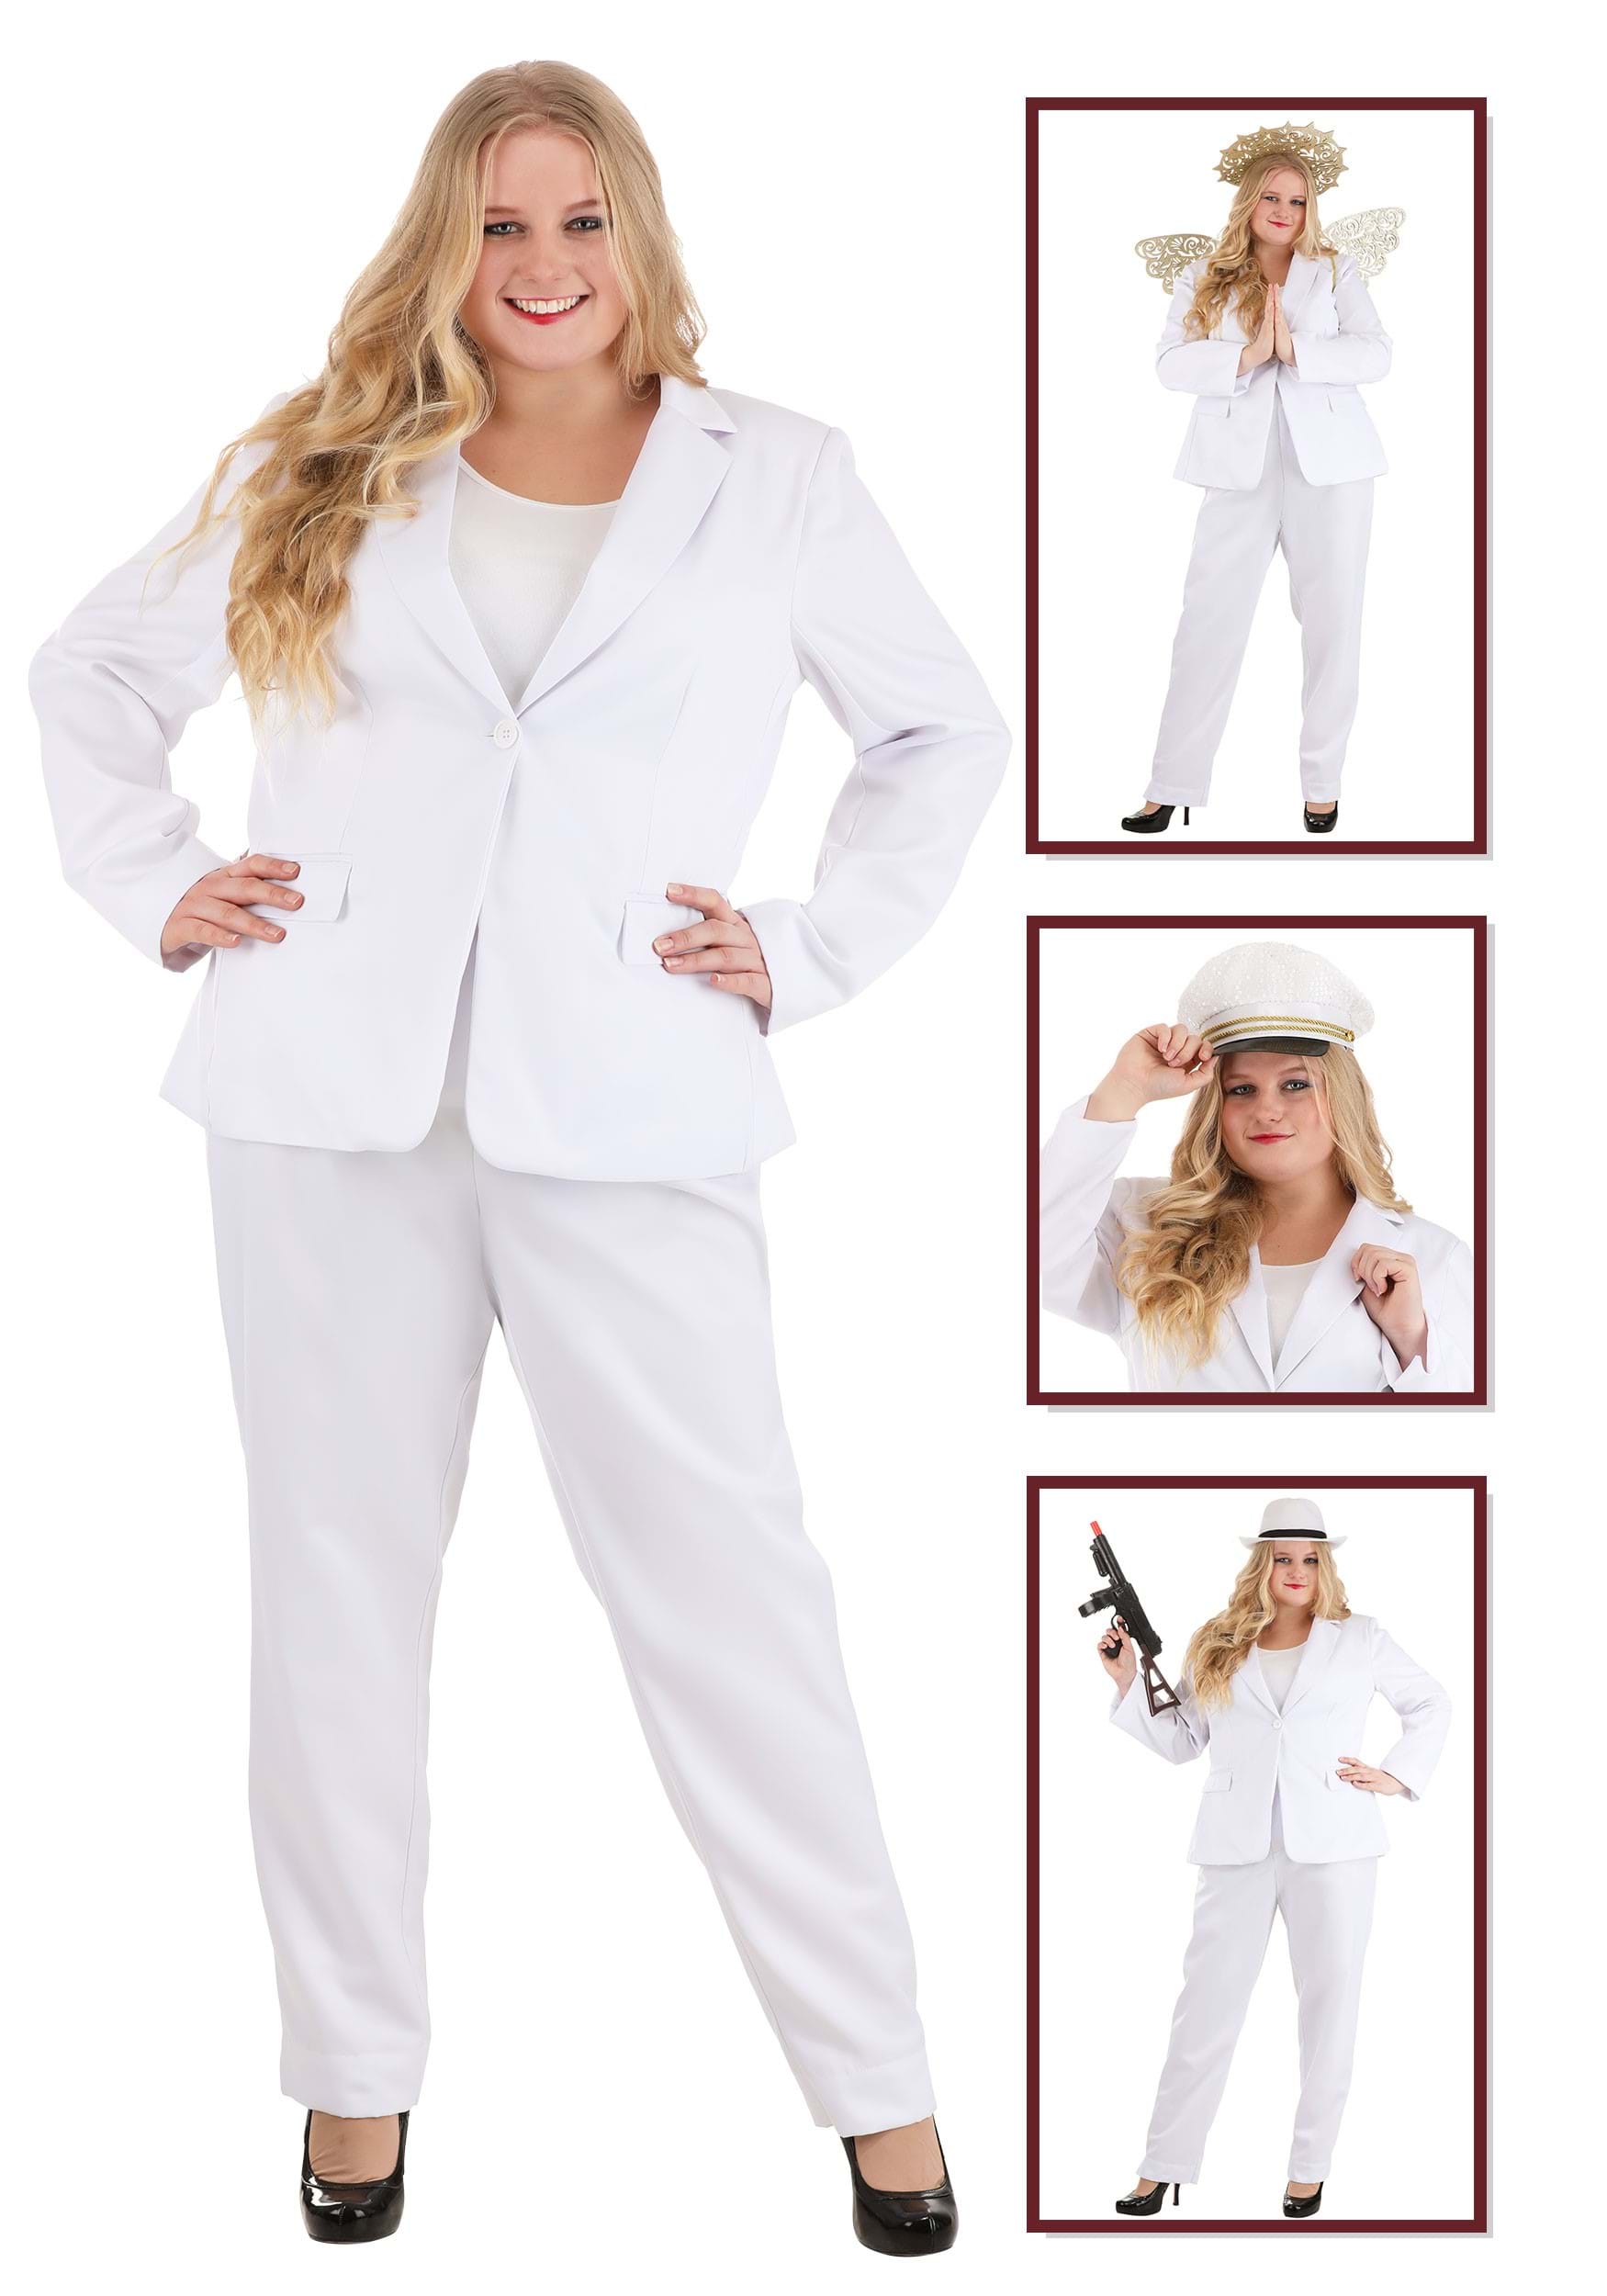 https://images.halloweencostumes.ca/products/71291/1-1/plus-size-womens-white-suit.jpg